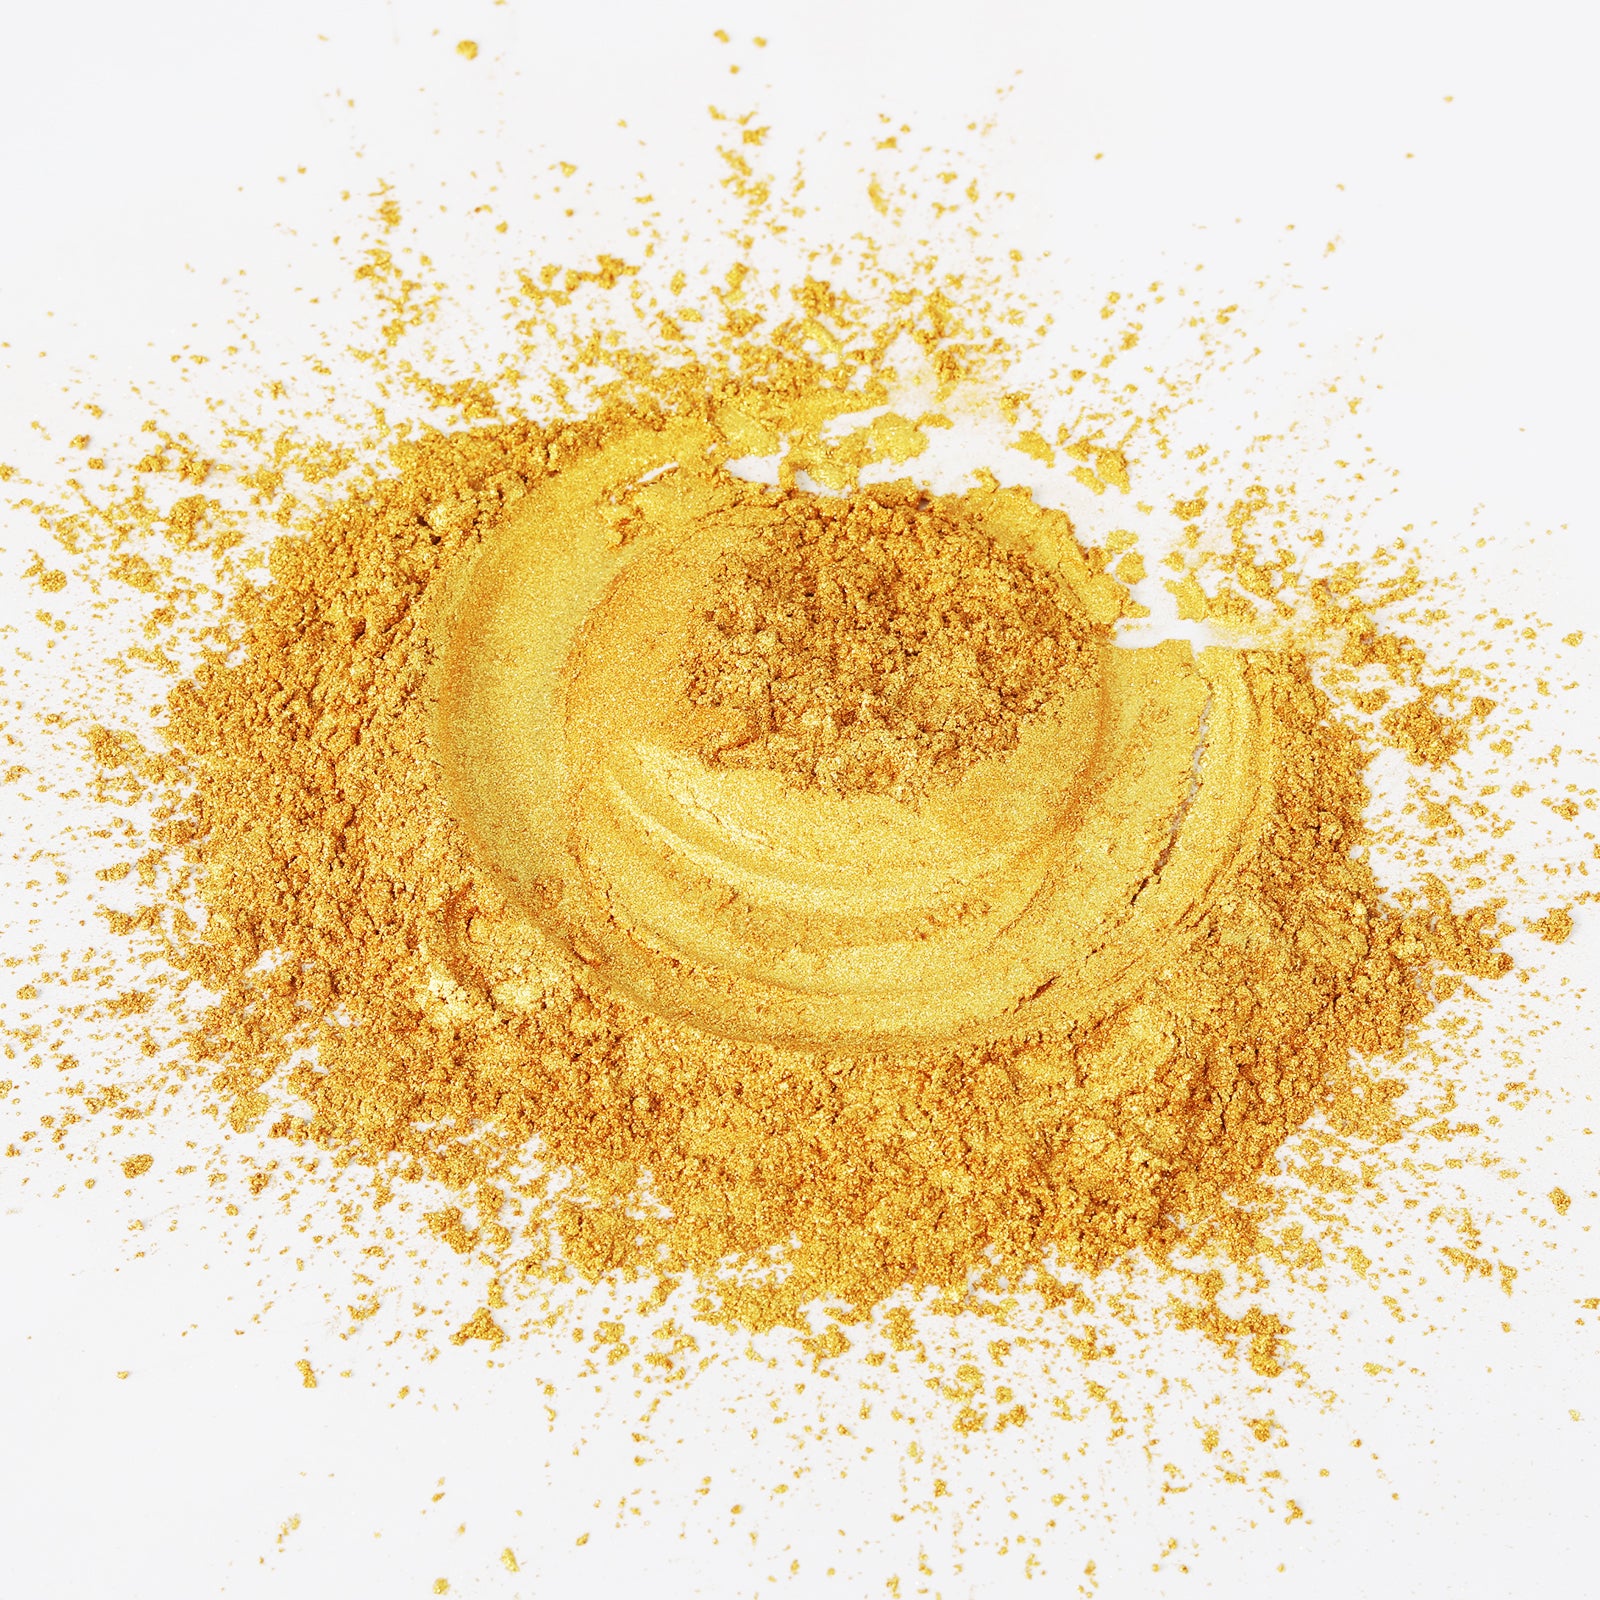 YELLOW GOLD Mica Powder Cosmetic Grade 100 grams each (3 PACK) *READ MORE*